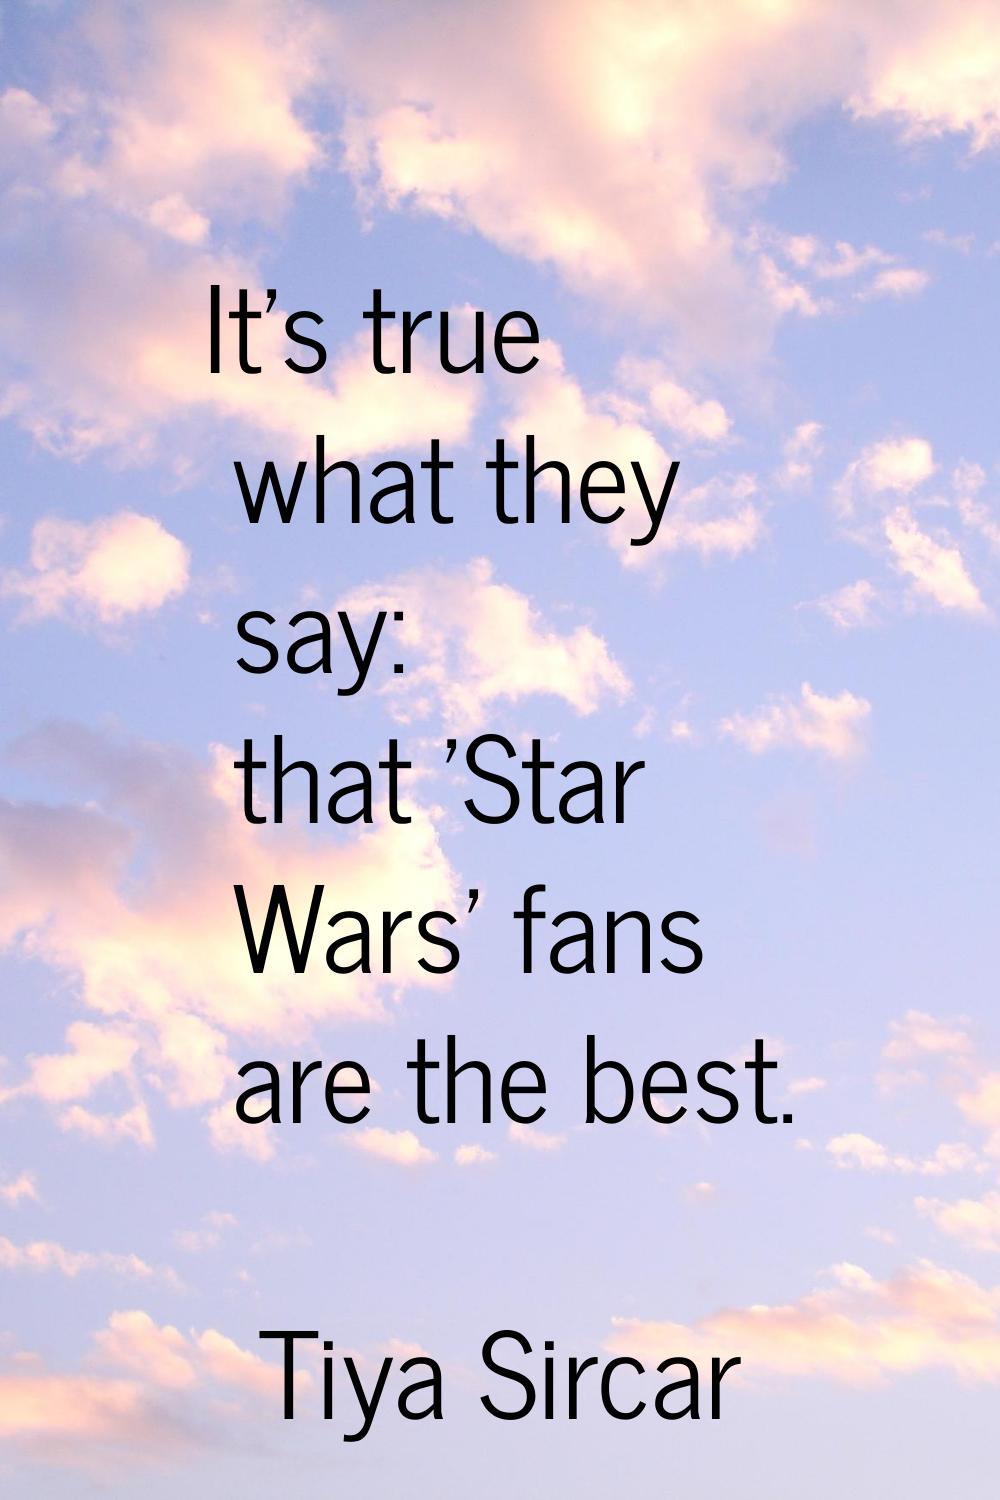 It's true what they say: that 'Star Wars' fans are the best.